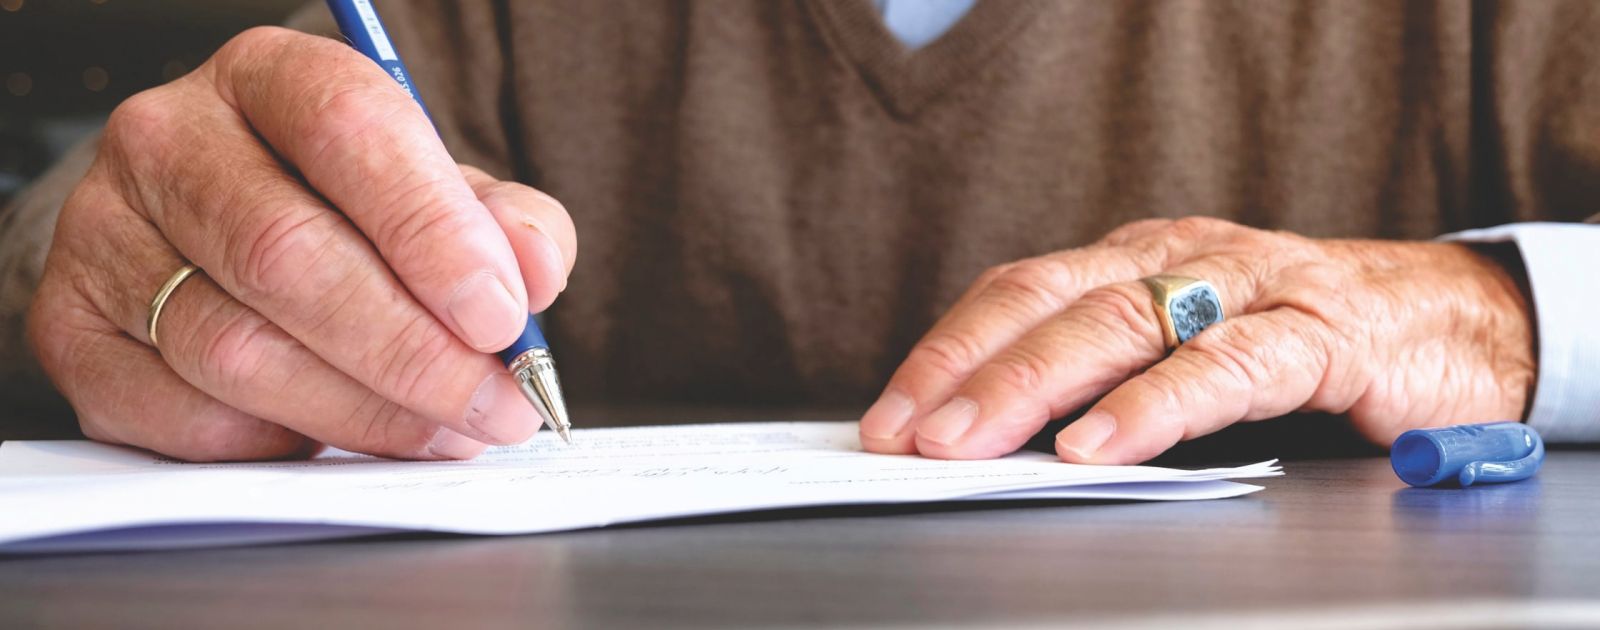 Lasting Power of Attorney and Will: Why you need to talk about these two important documents